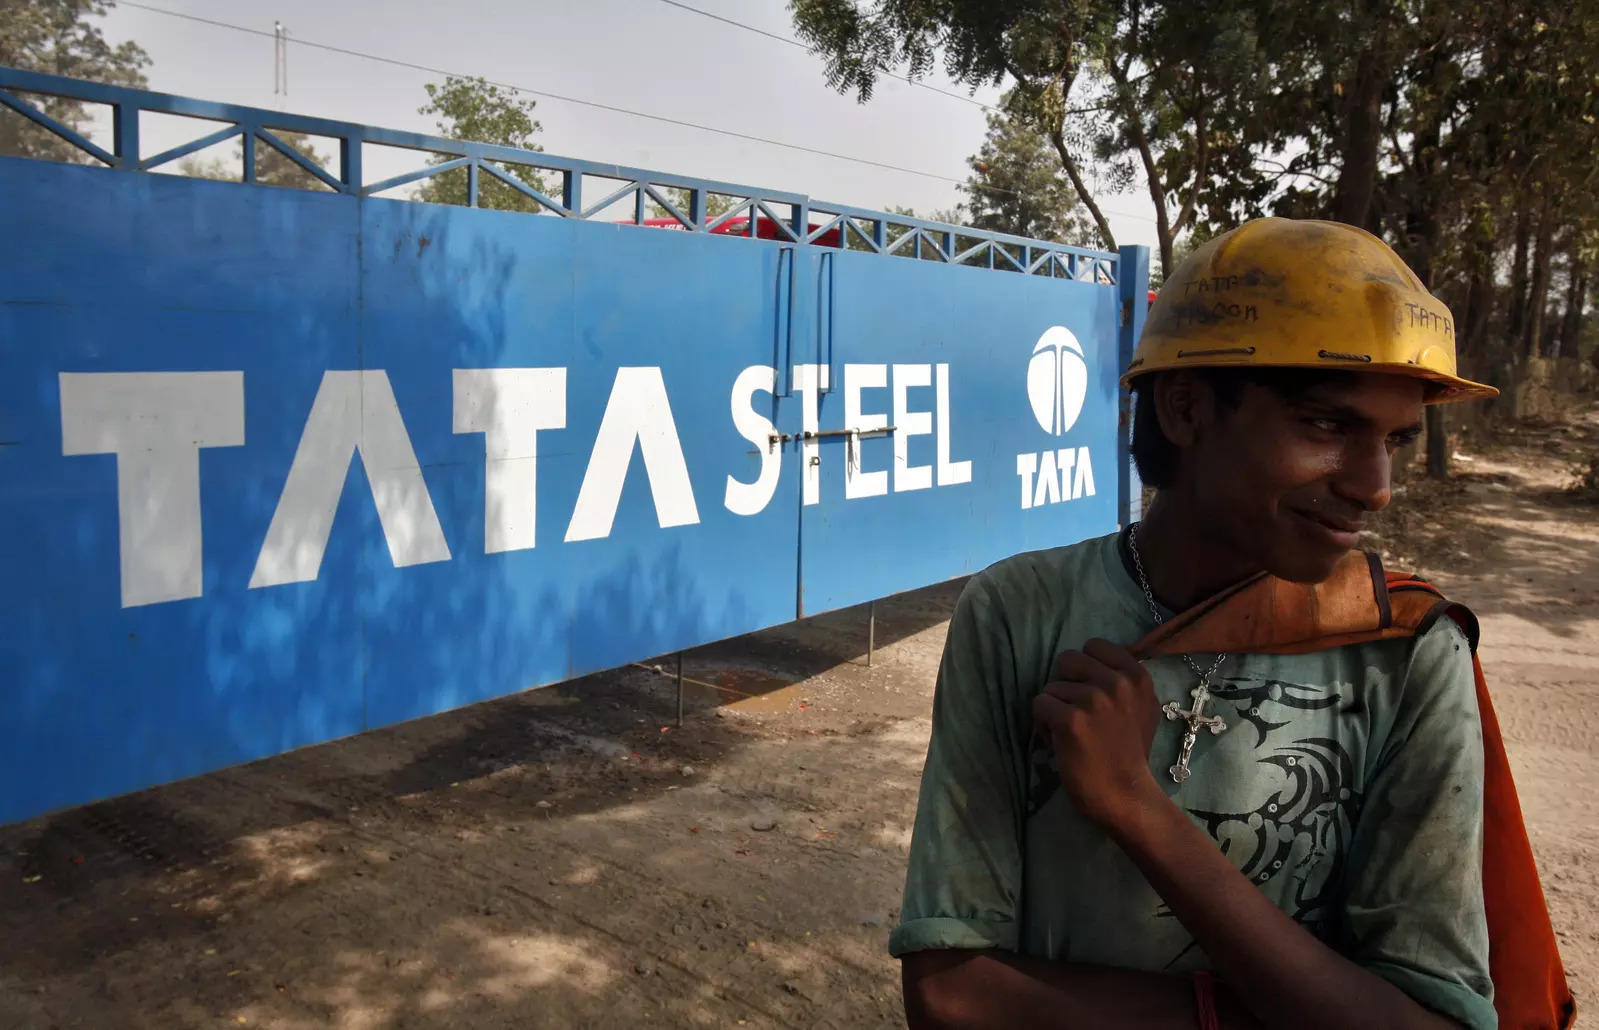 Tata Steel's merger of seven group companies a 